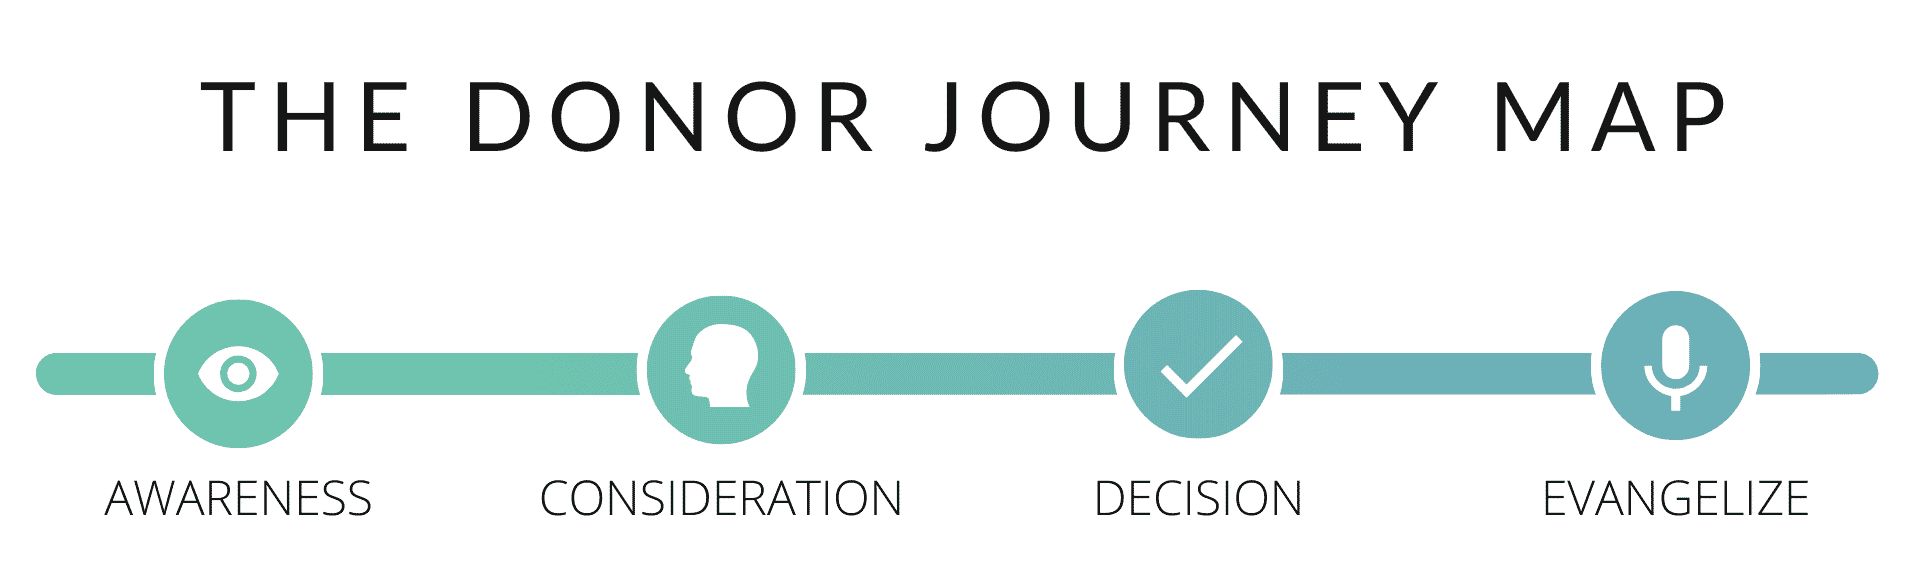 the donor journey map with four stages: awareness, consideration, decision, evangelize